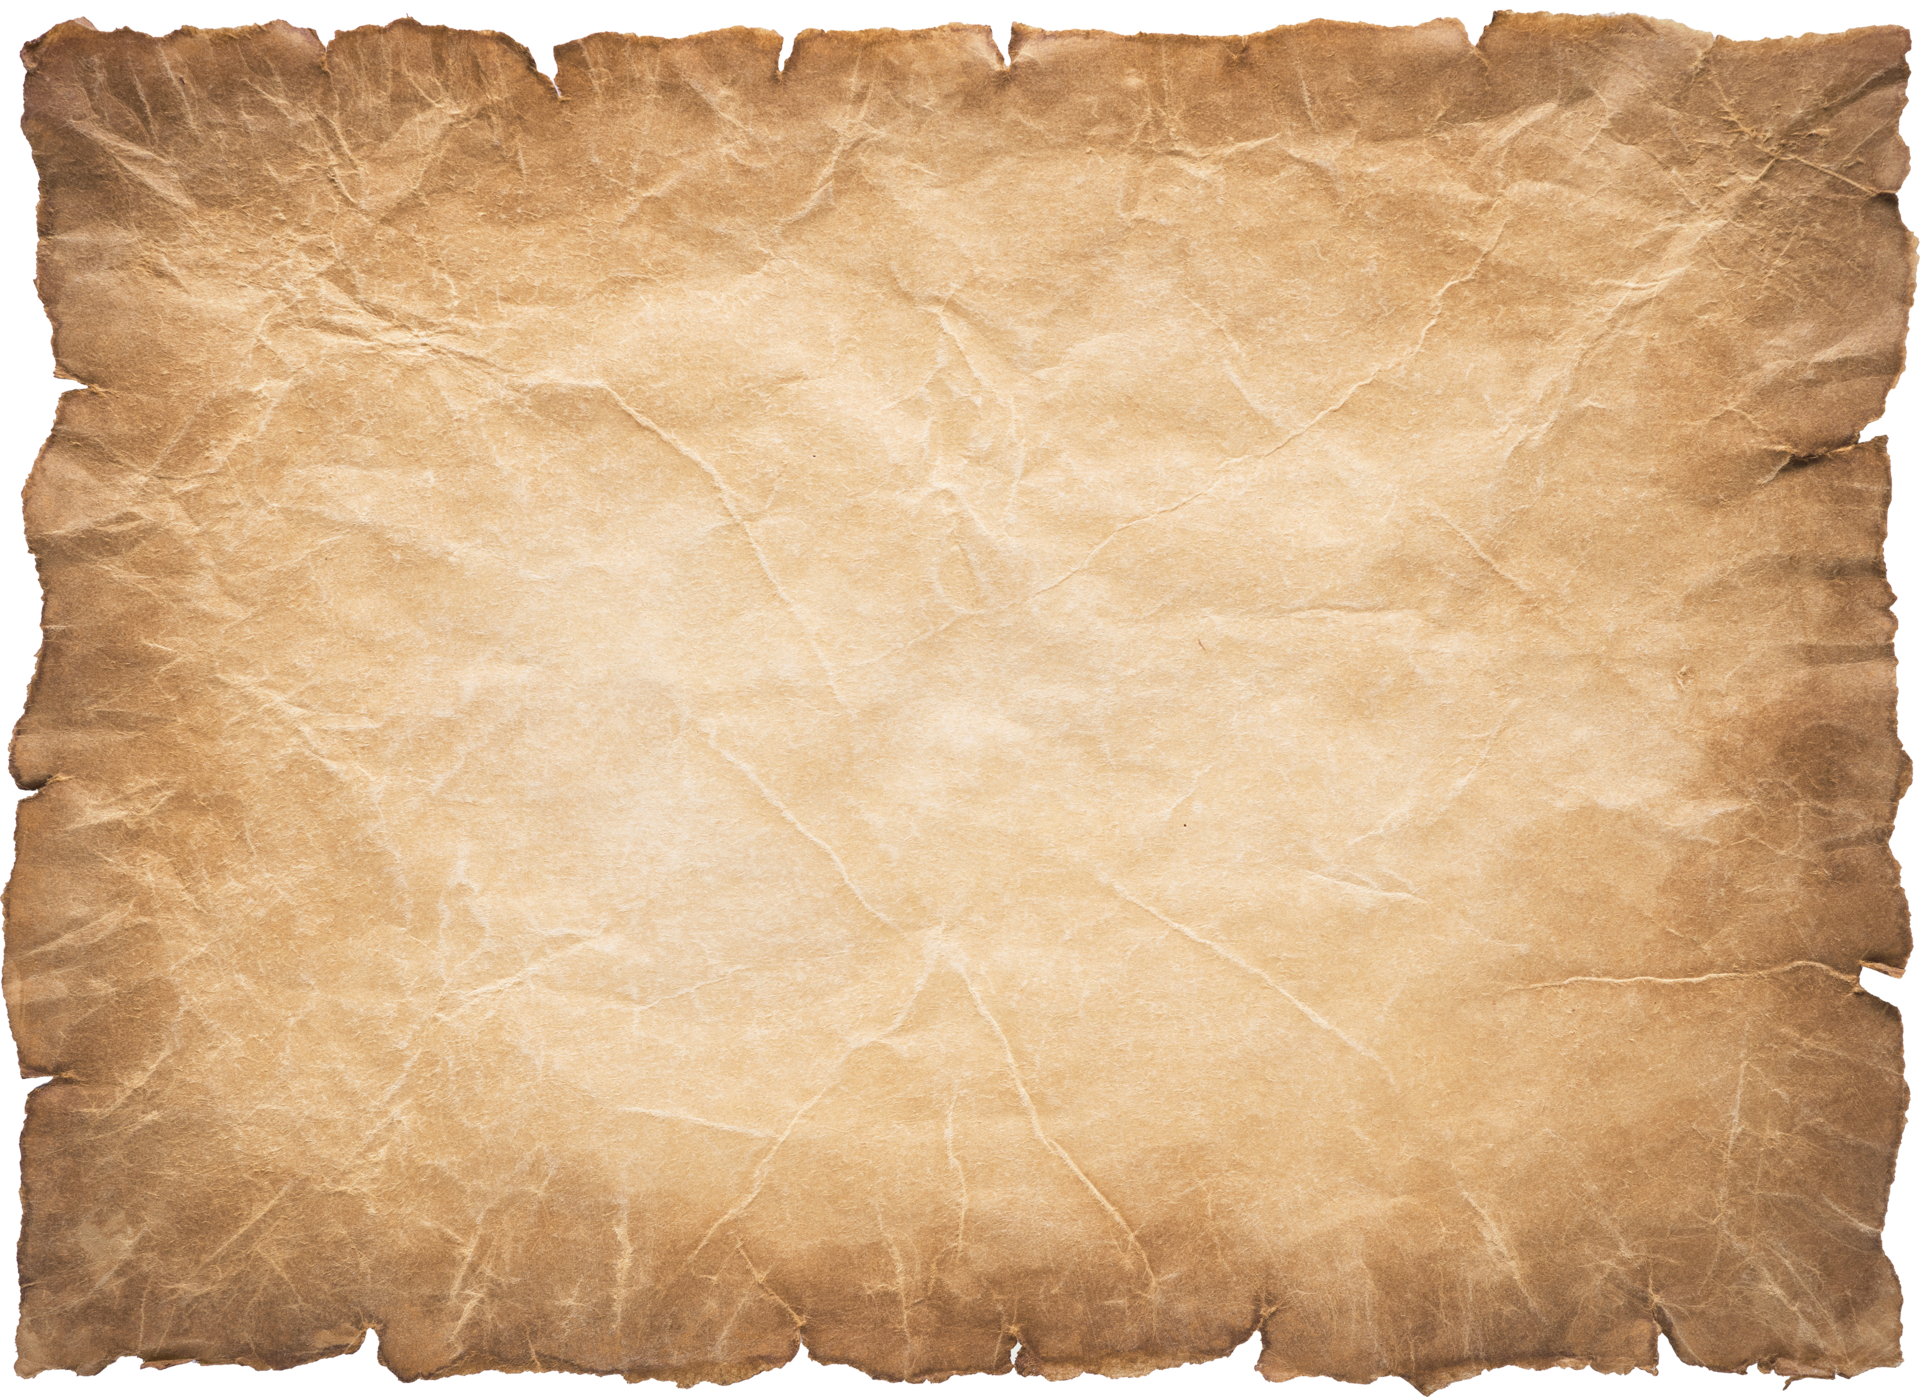 https://static.vecteezy.com/system/resources/previews/012/981/809/original/old-parchment-paper-sheet-vintage-aged-or-texture-background-png.png